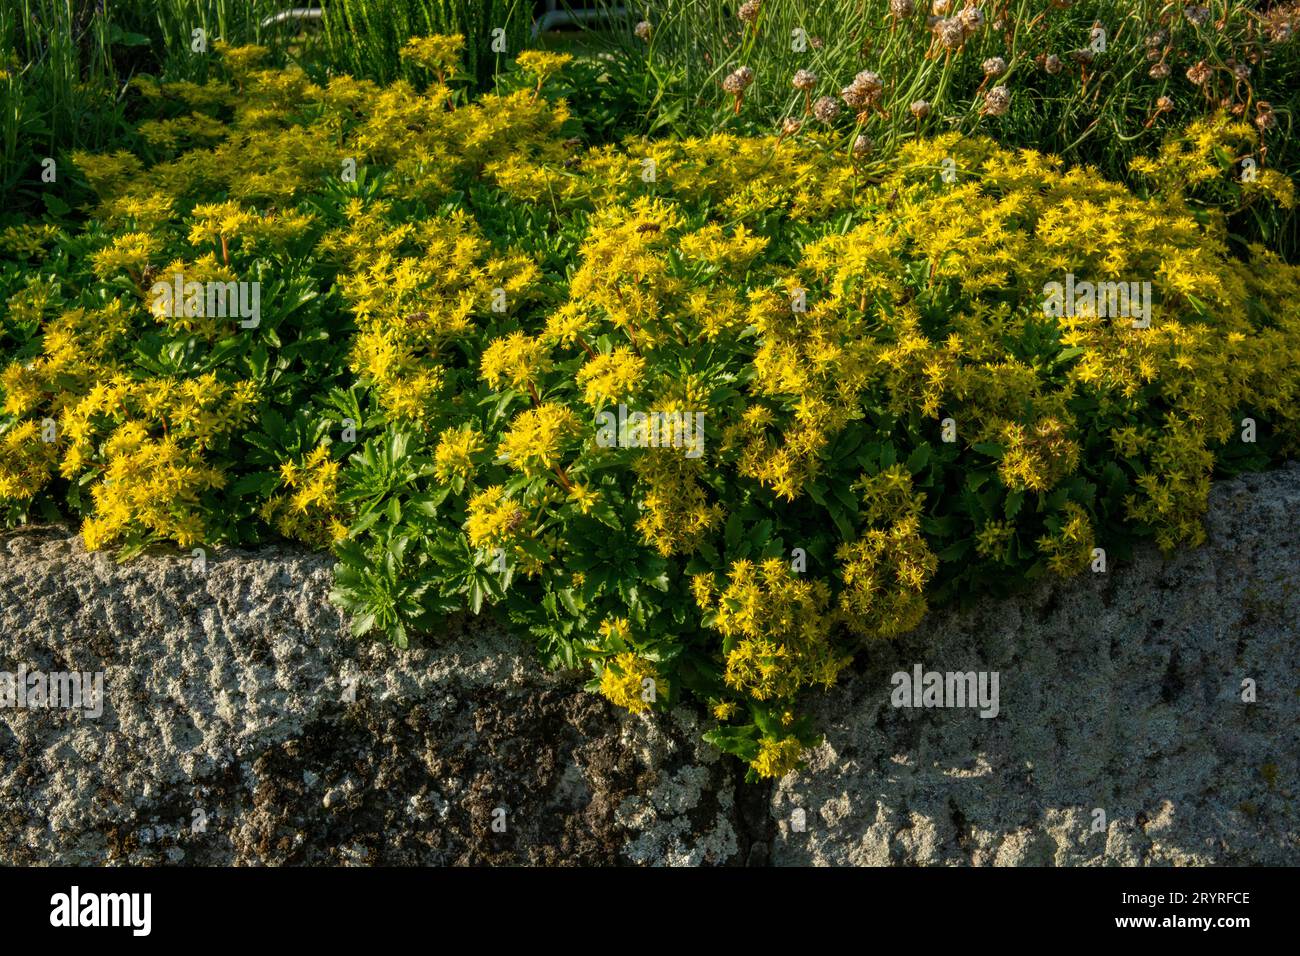 Yellow Phedimus aizoon flowers in the spring. Stock Photo